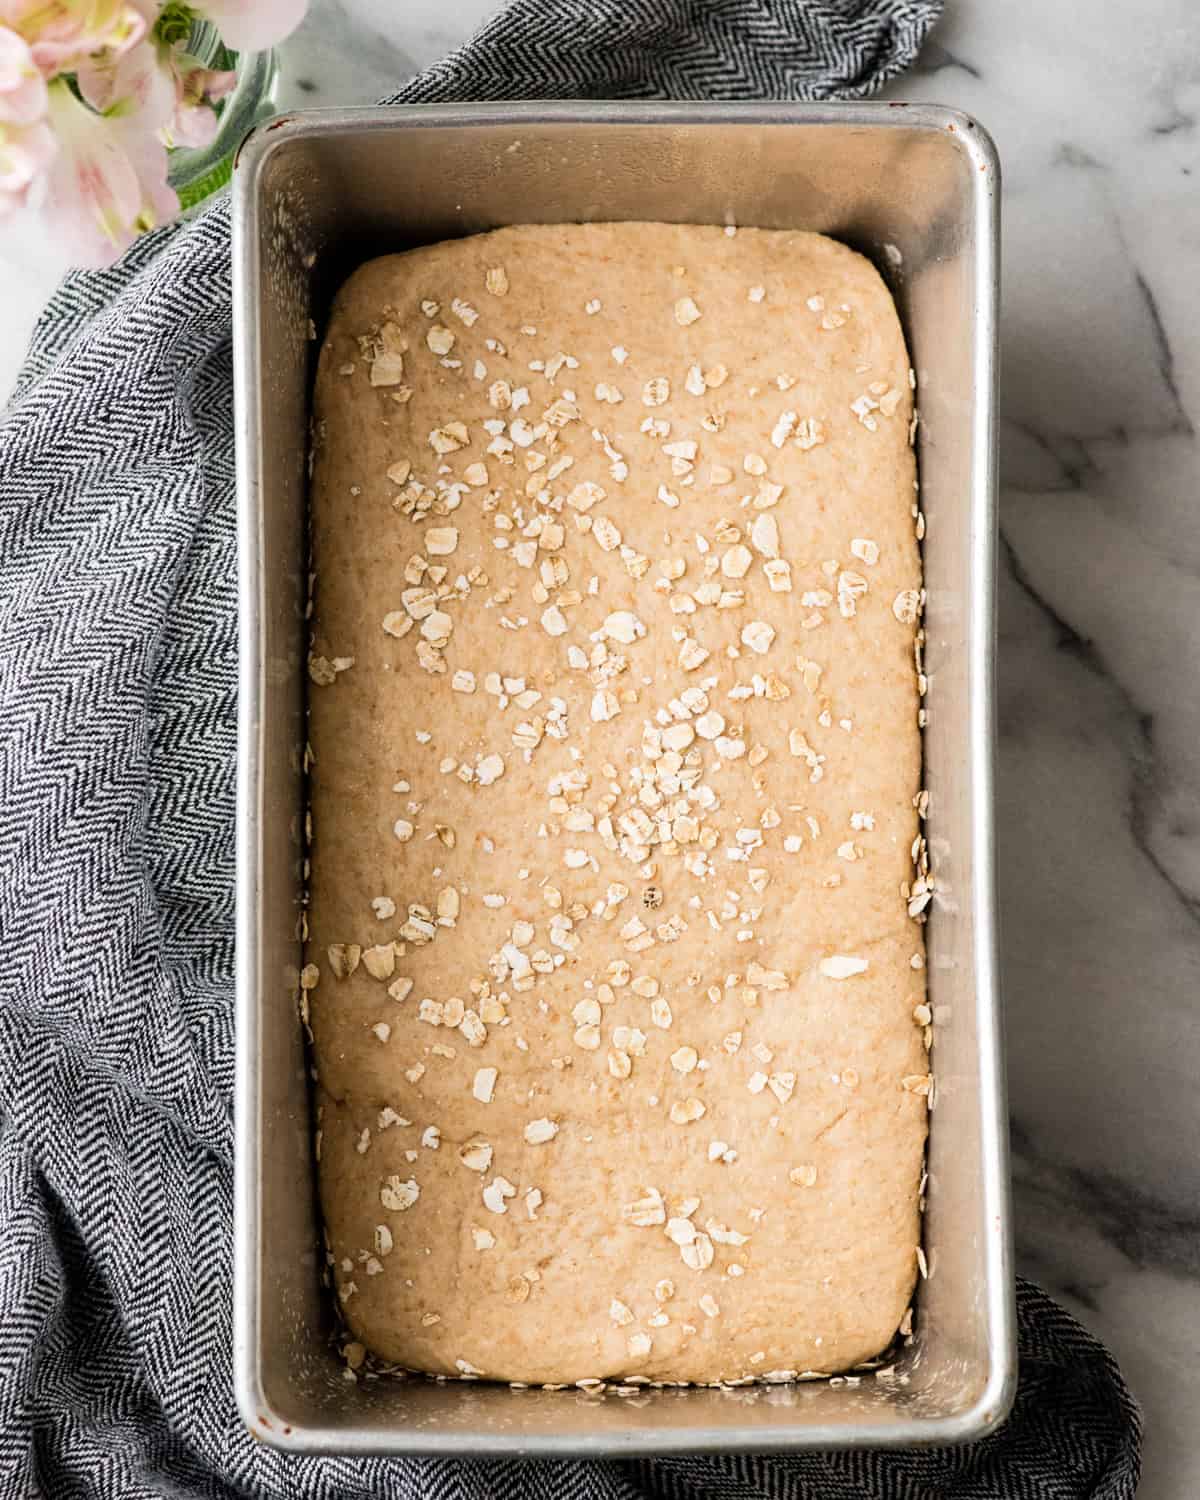 How to Make Honey Wheat Bread - dough in a loaf pan before rising